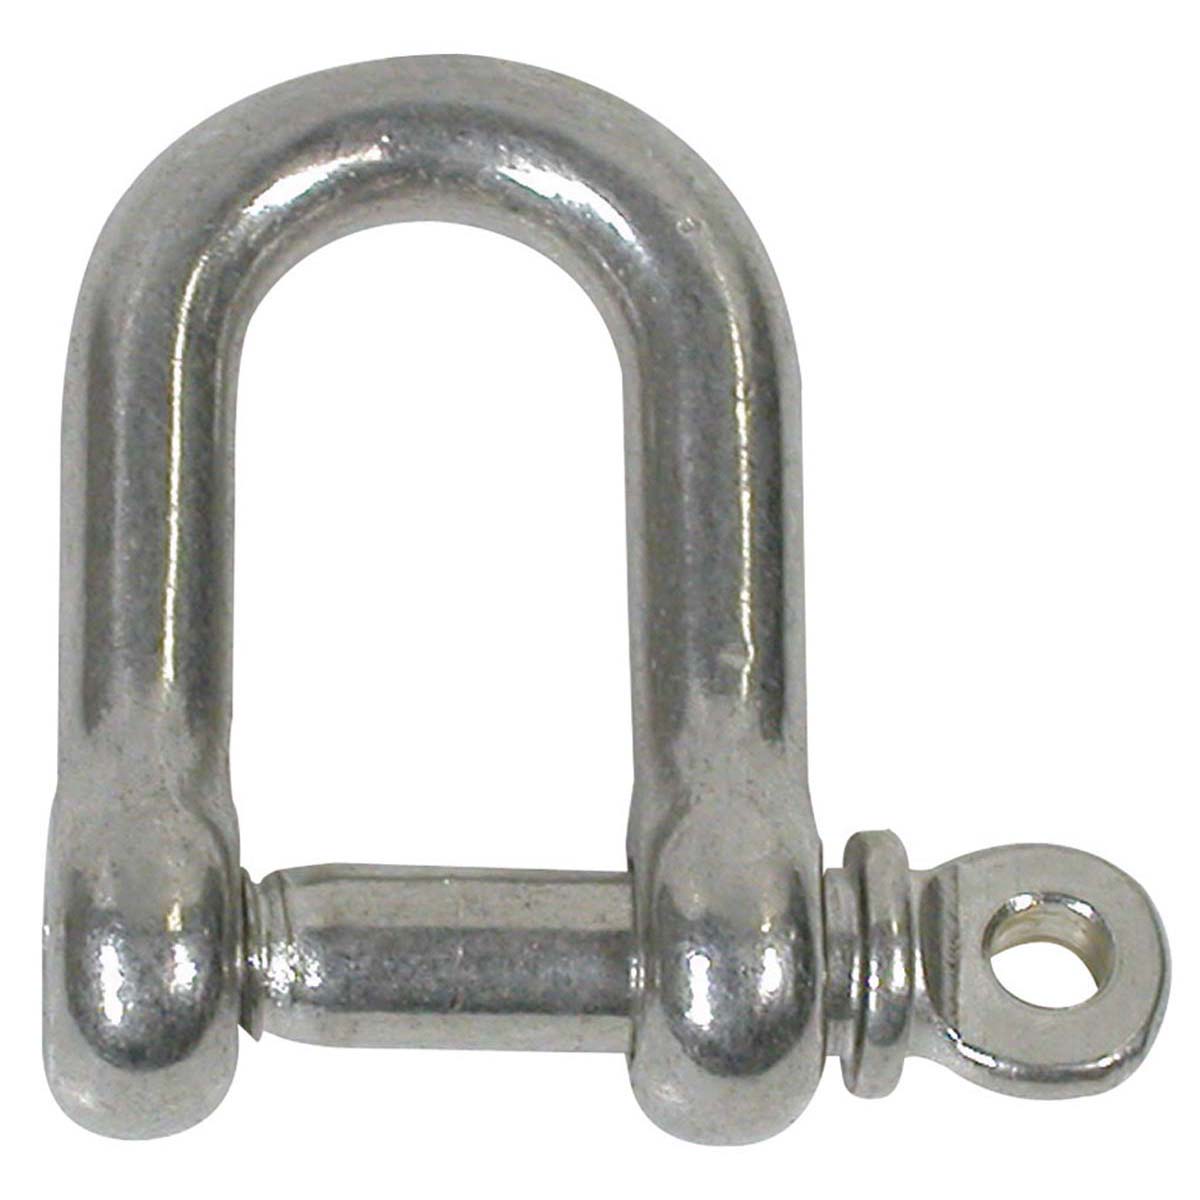 Blueline Stainless Steel D Shackle 4mm